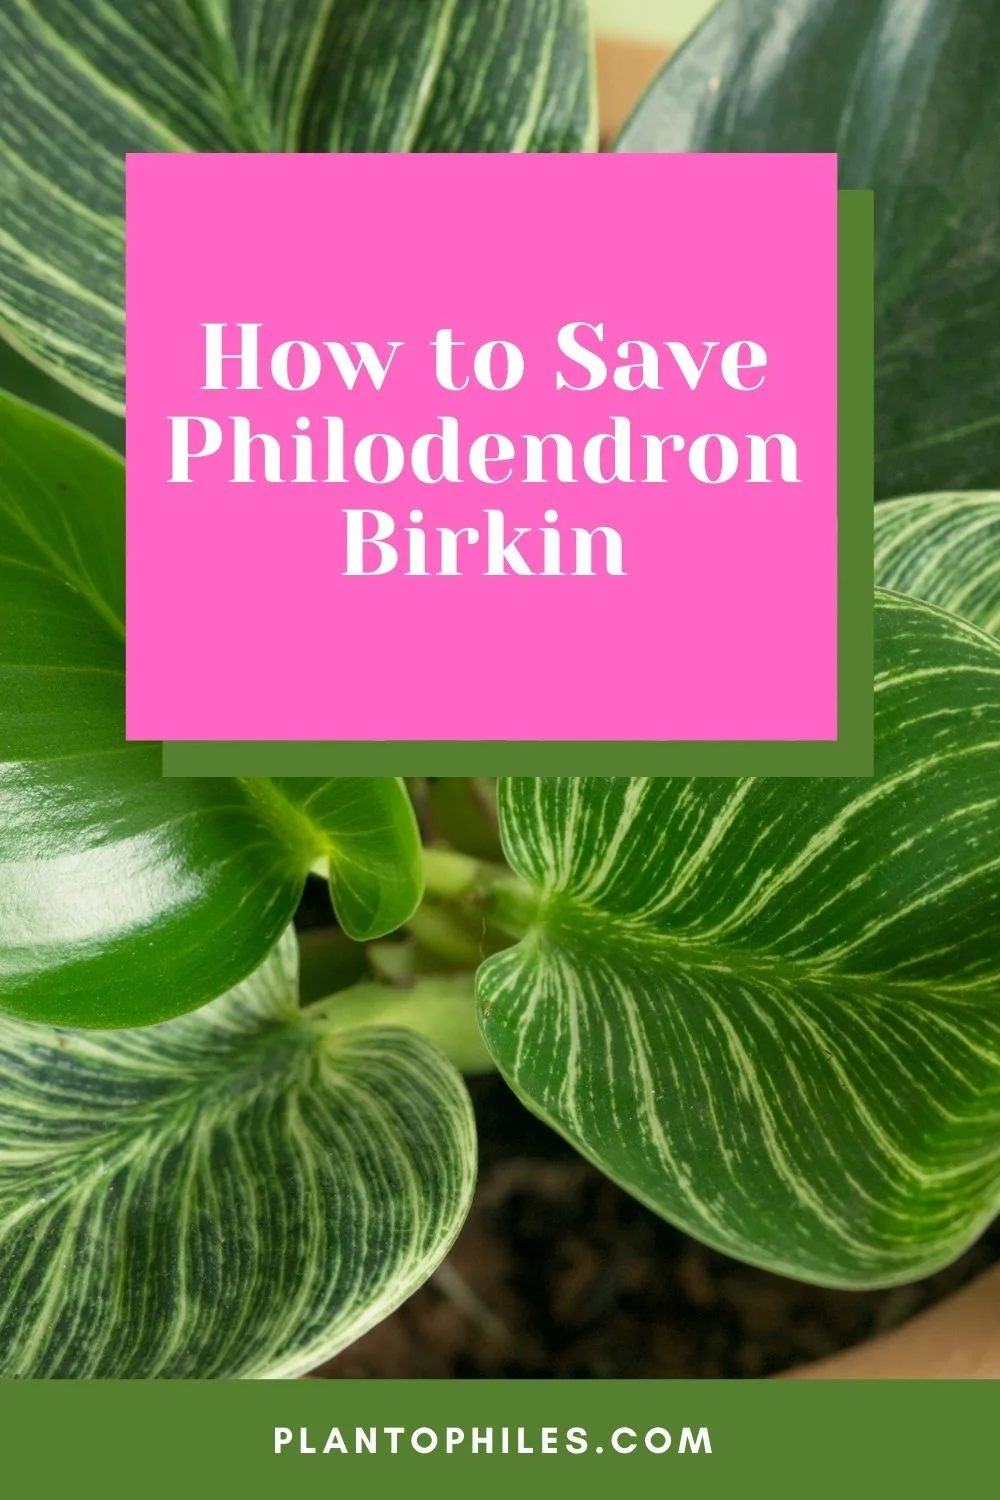 How to Save Philodendron Birkin